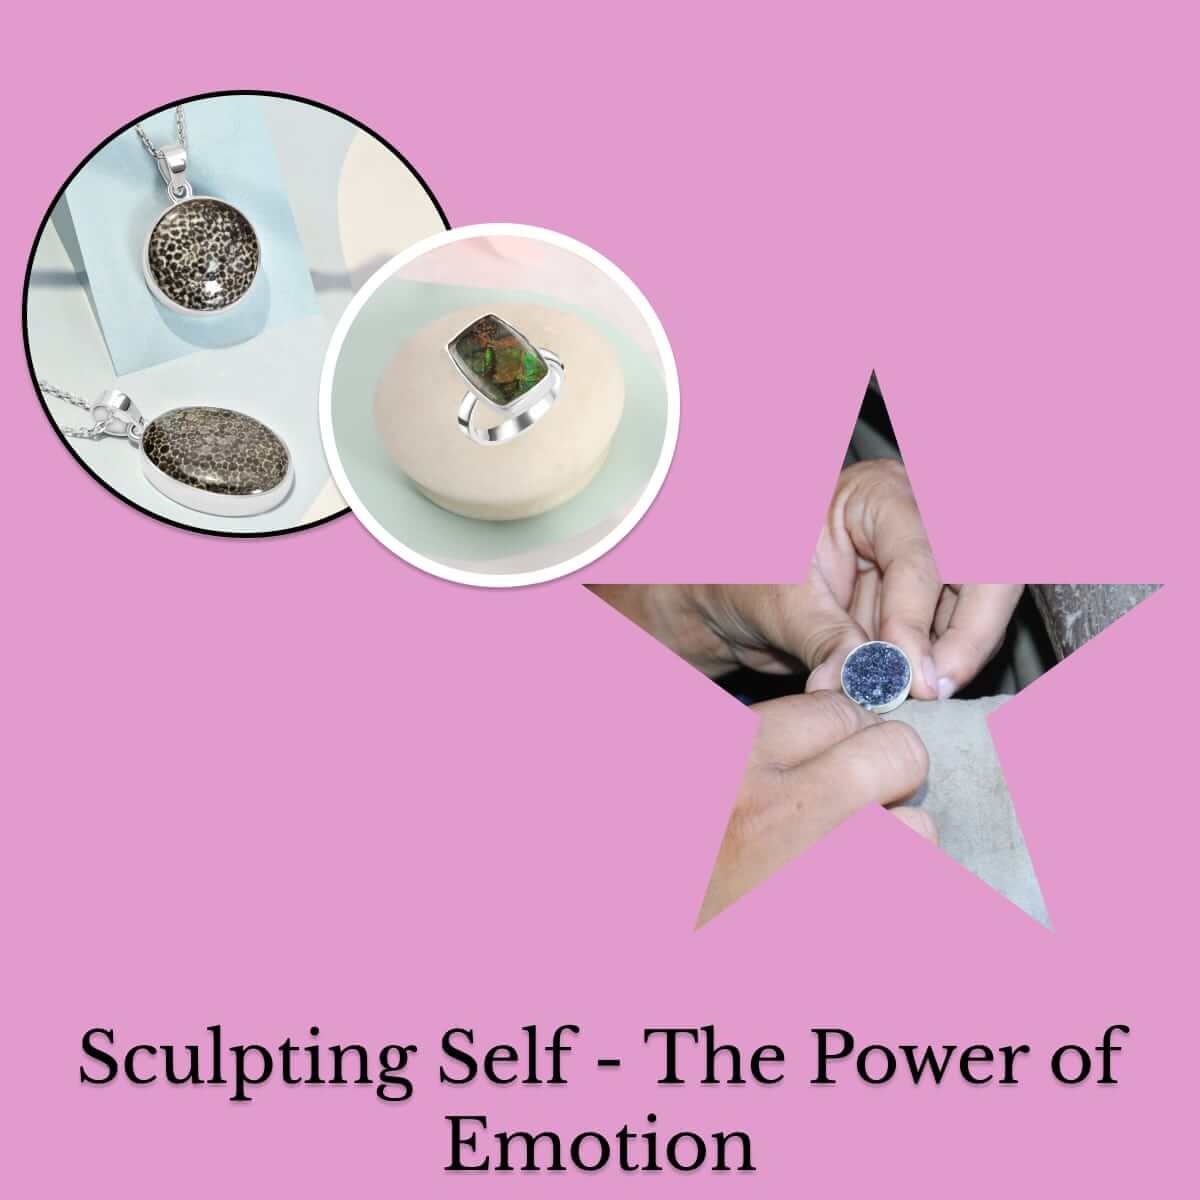 Emotional Resonance and Self-Expression